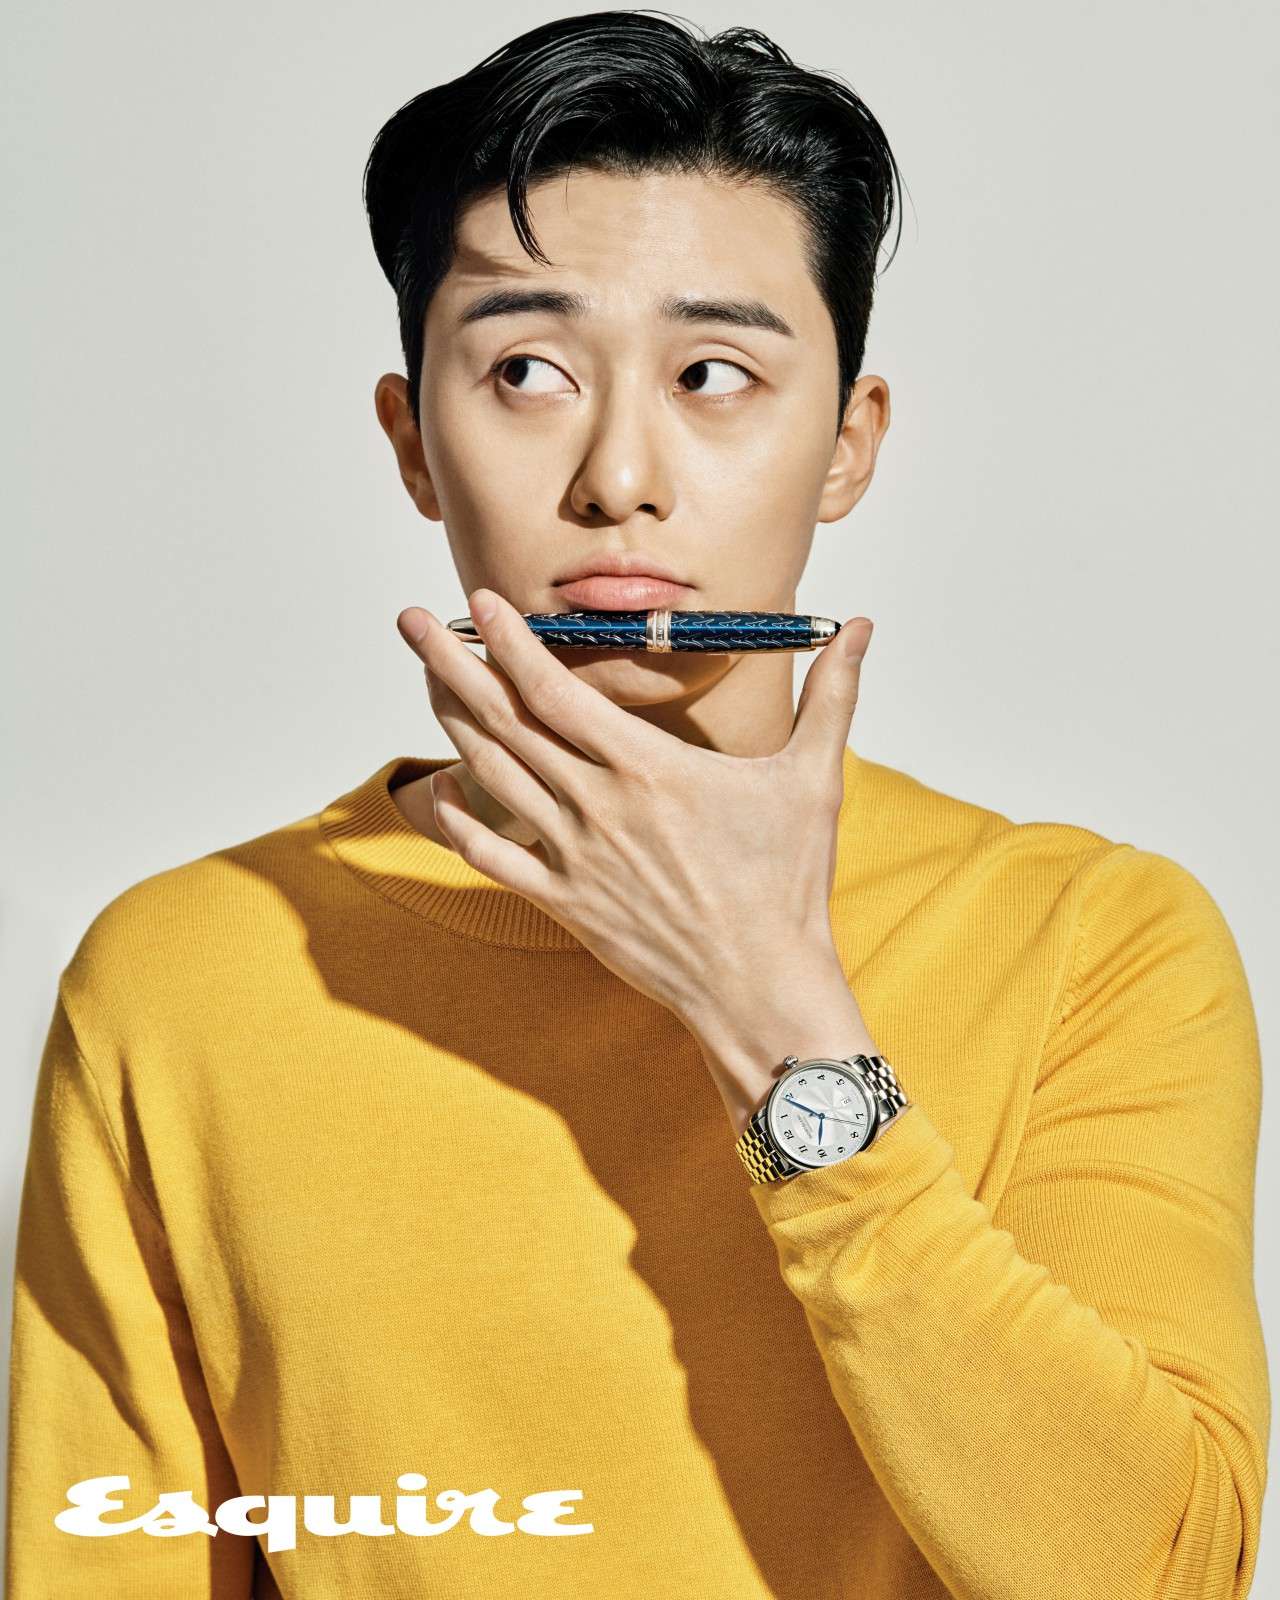 Park Seo Joon For June 2018 Esquire - Couch Kimchi